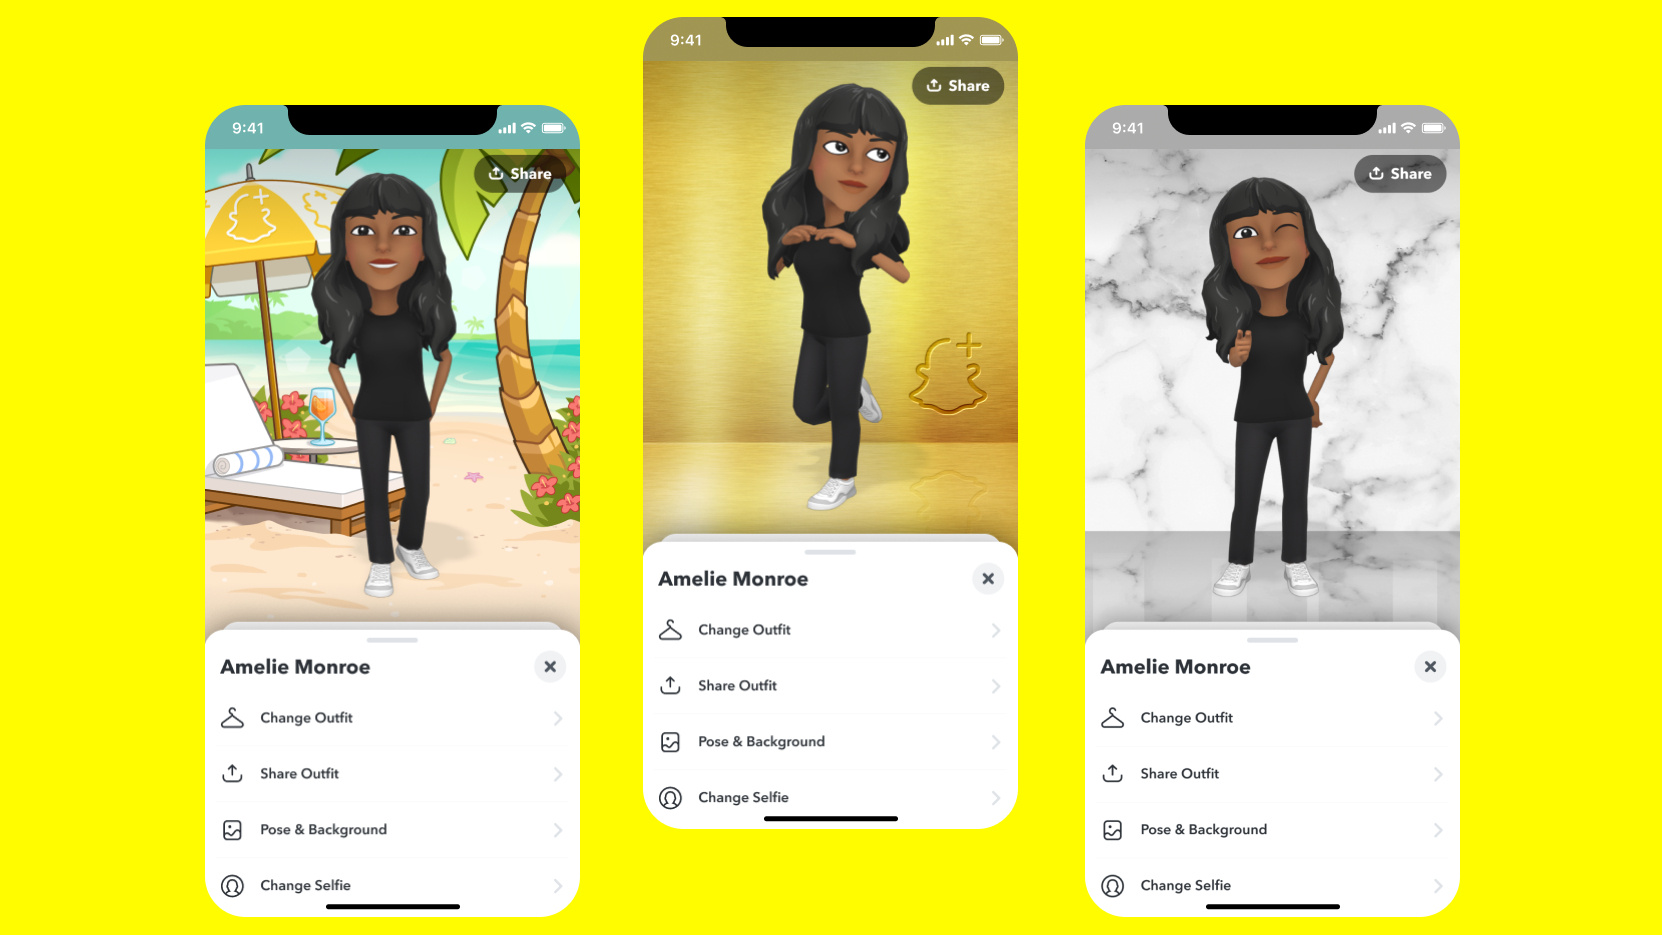 snapchat-update-introduces-new-emoji-system